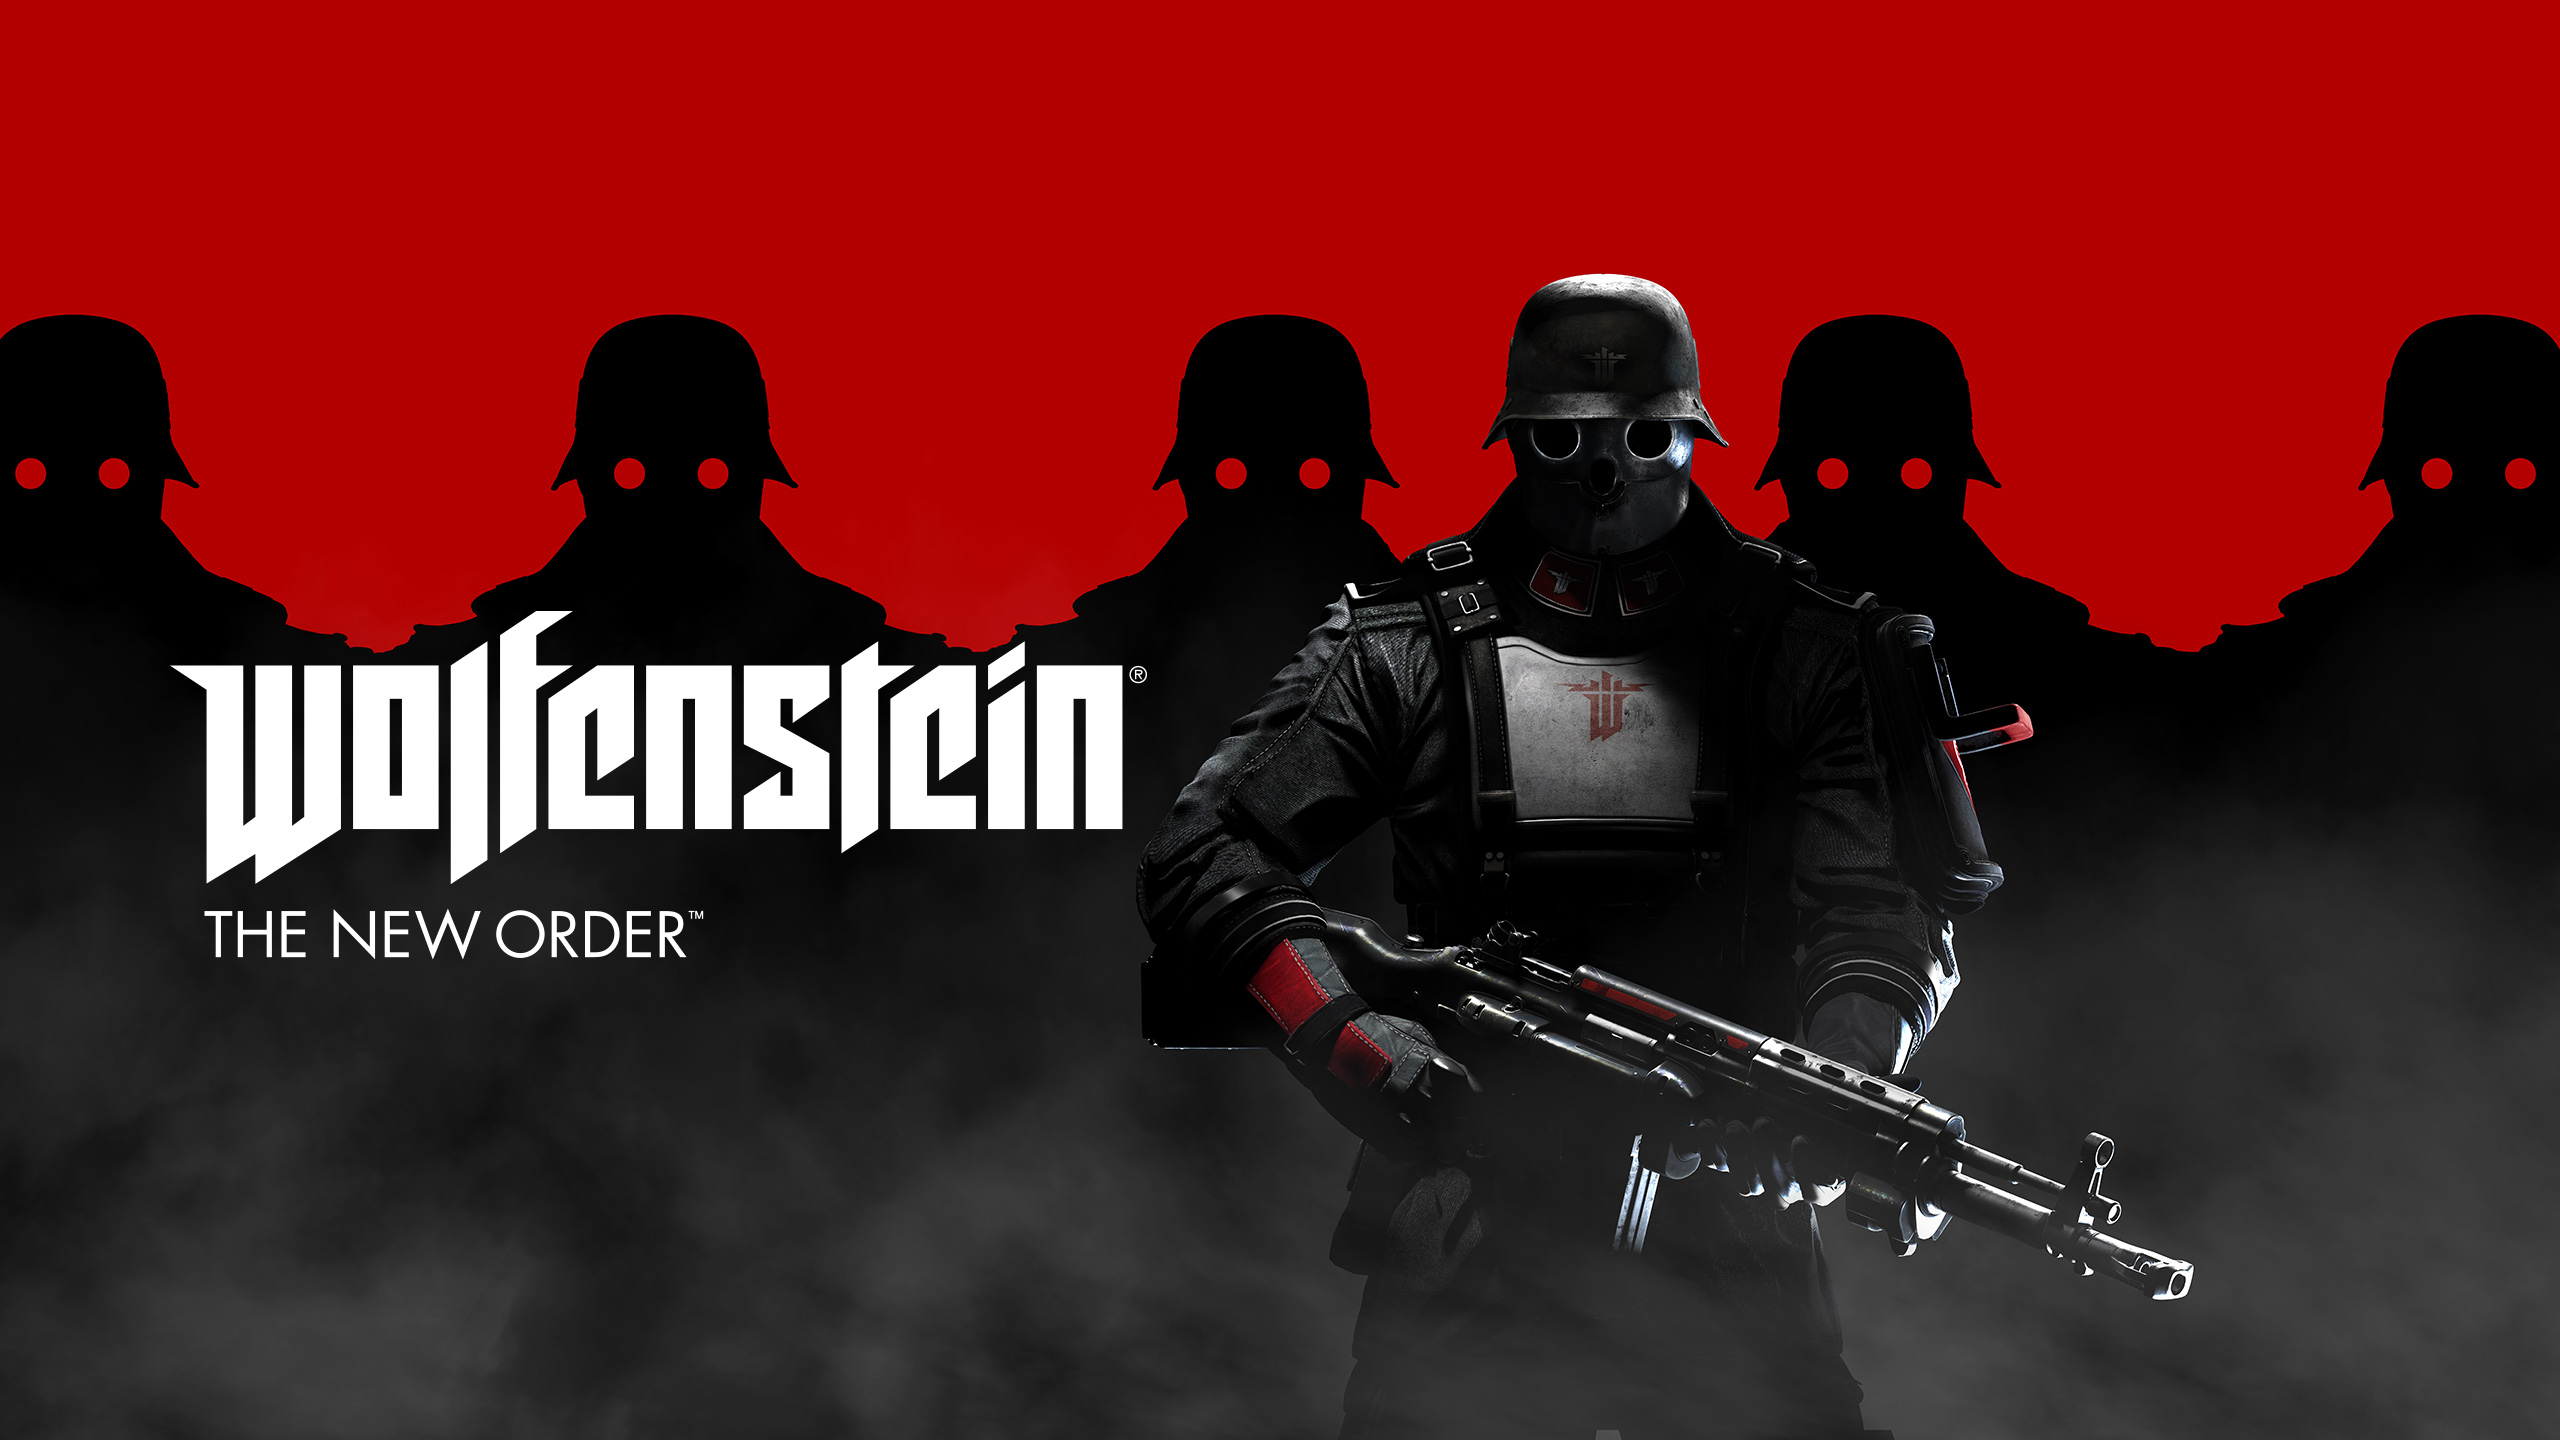 wolfenstein: the new order is free on epic games store